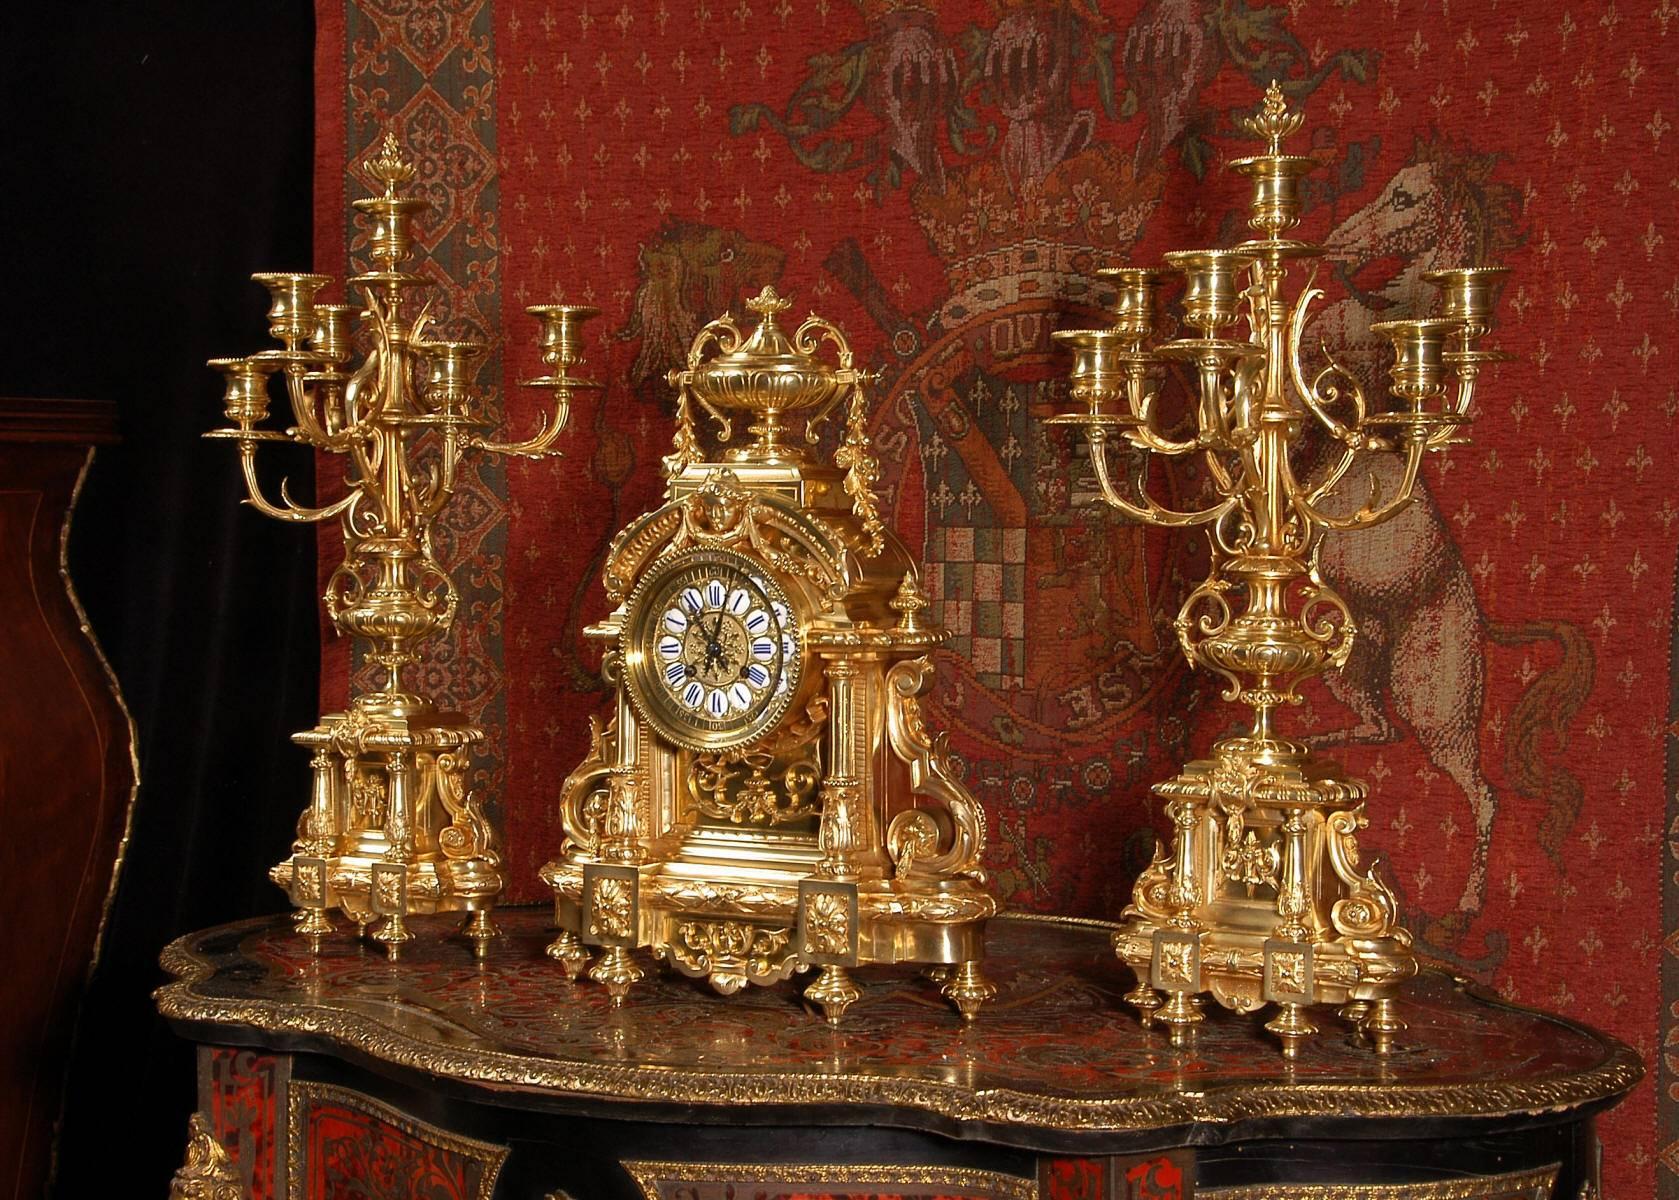 A stunning, superb quality, large and heavy clock set by the famous maker Japy Freres. It is very finely modelled in bronze in the Louis XVI classical style. Two columns sit either side of a blind fretted panel of ornate acanthus scrolls with scroll